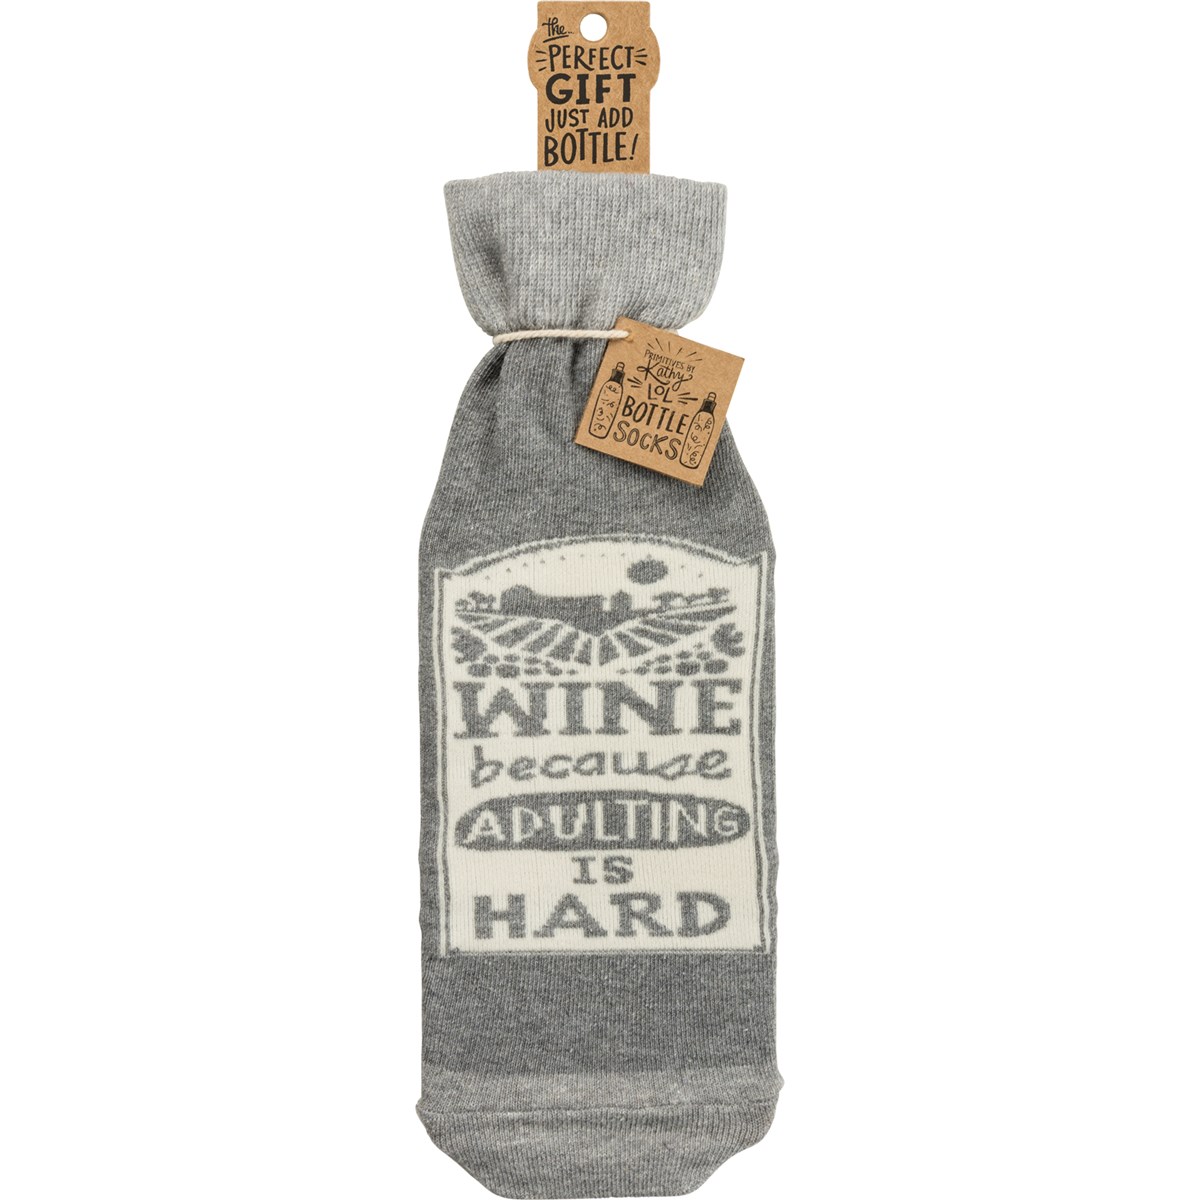 Bottle Sock - Wine Because Adulting Is Hard - 3.50" x 11.25", Fits 750mL to 1.5L bottles - Cotton, Nylon, Spandex